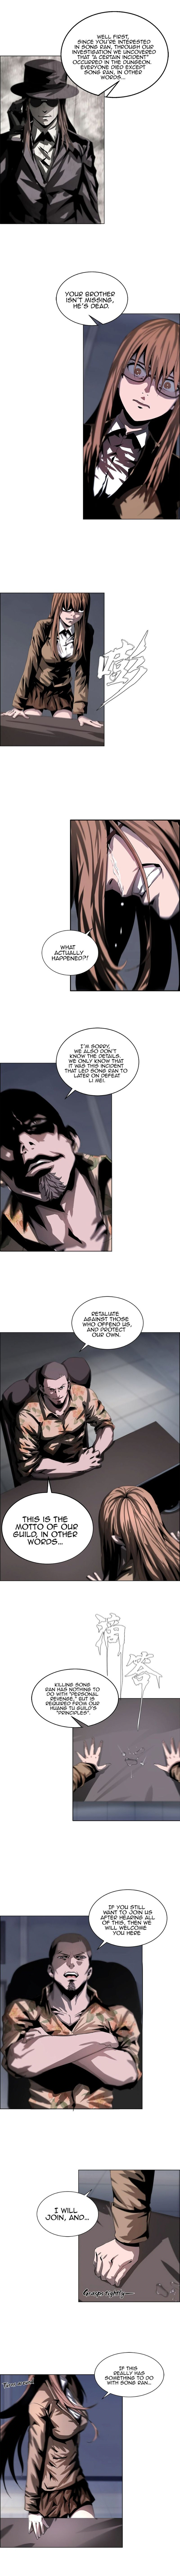 The Blade Of Evolution-Walking Alone In The Dungeon Chapter 24 page 4